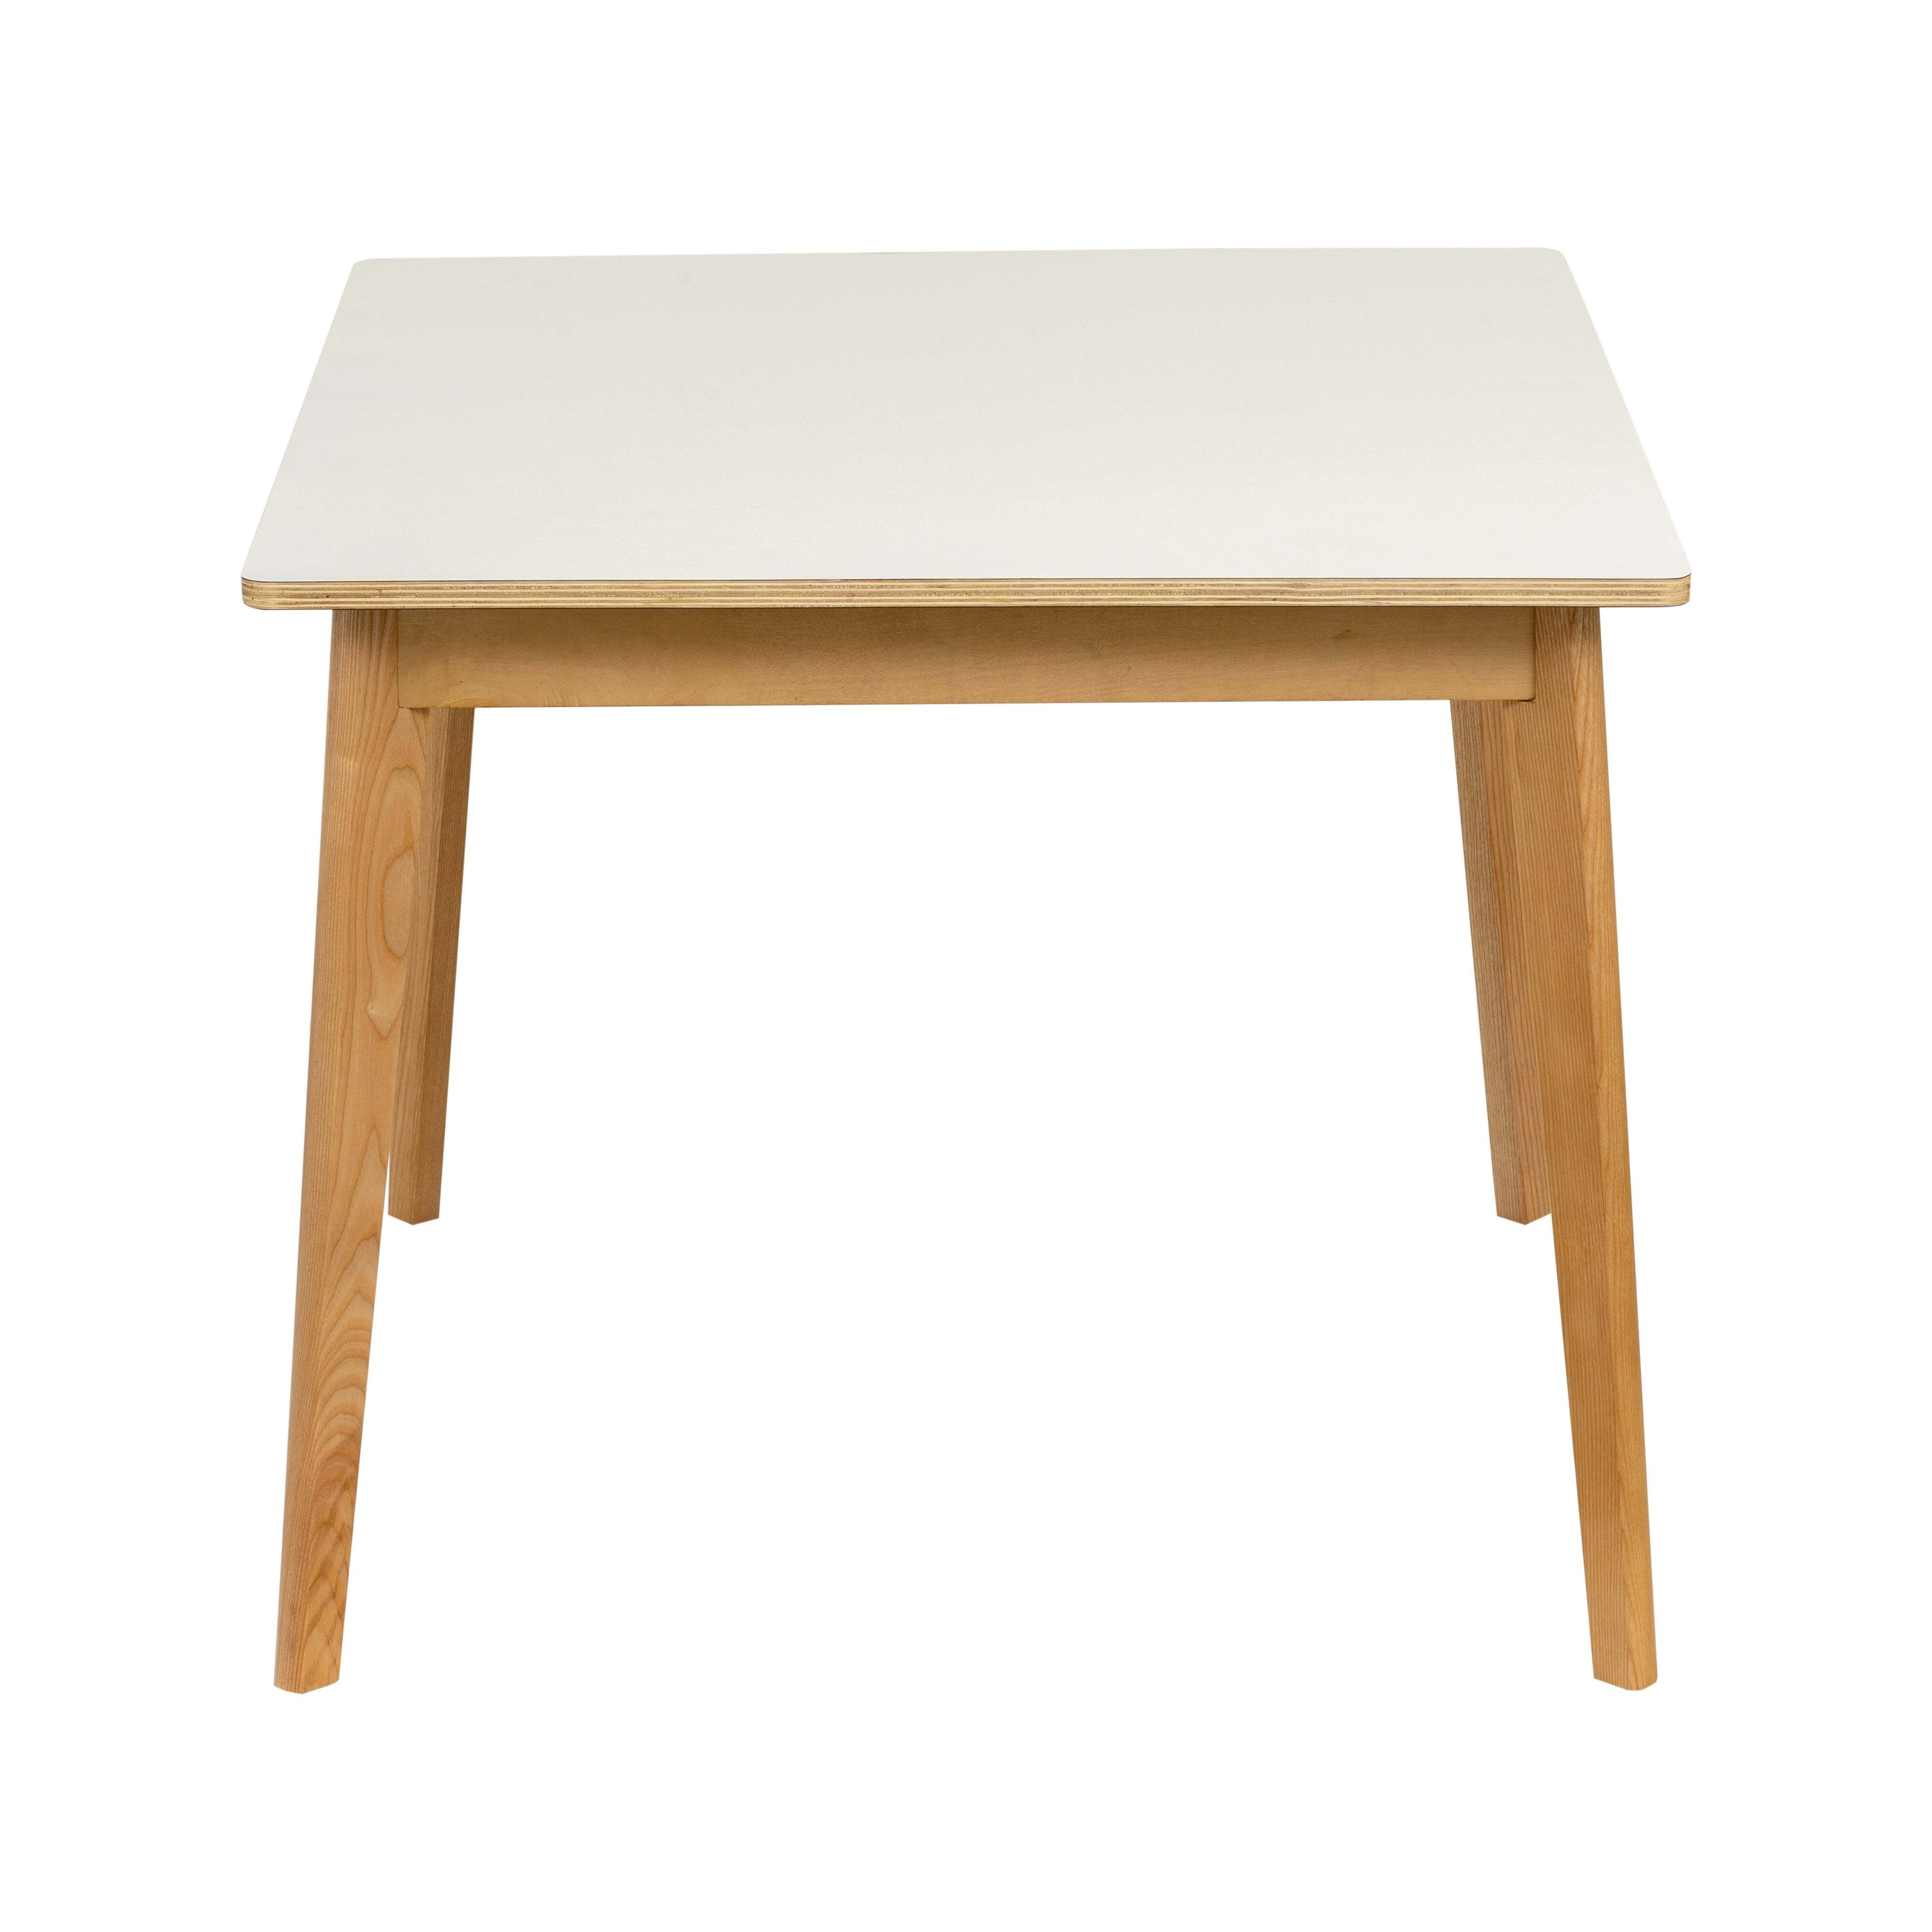 Elements Freja 4 Seater Square Dining Table White